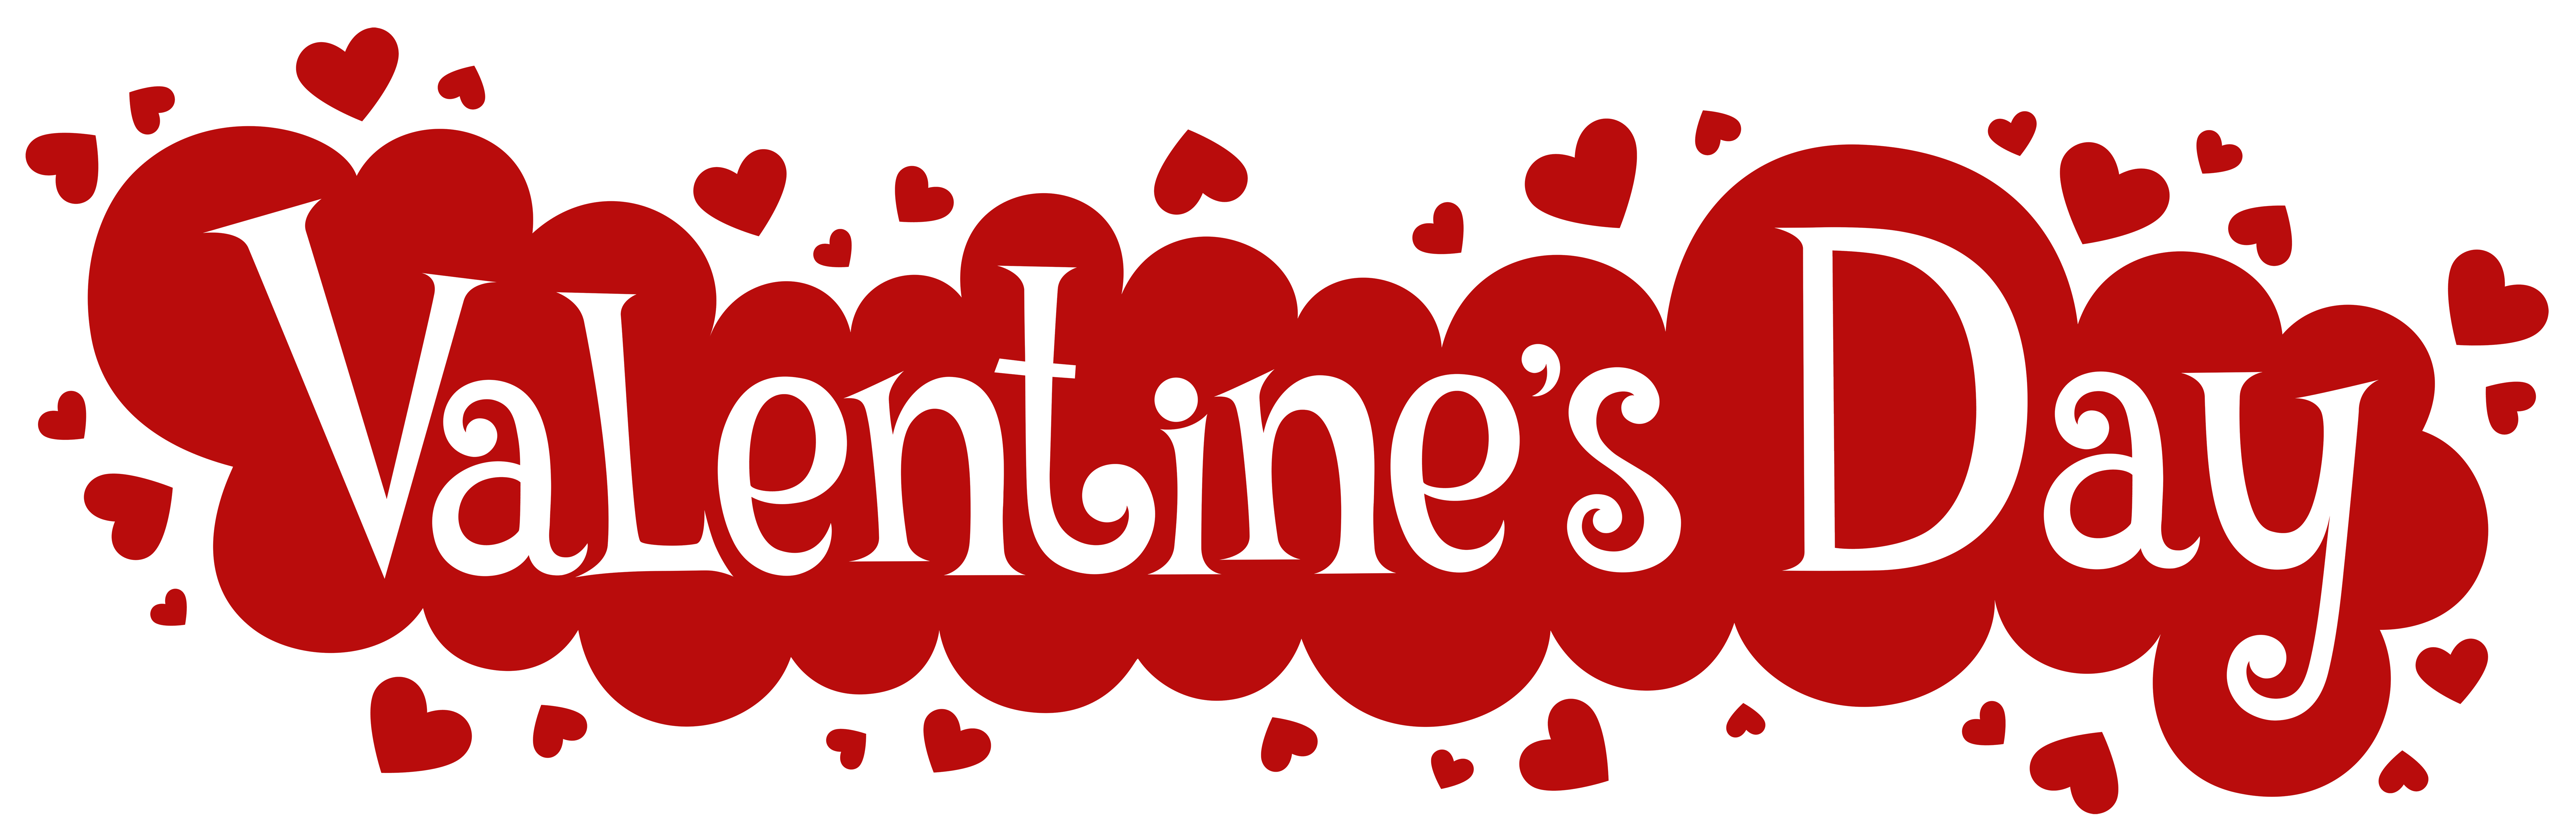 Valentines Day Clipart Png & Free Valentines Day Clipart.png.